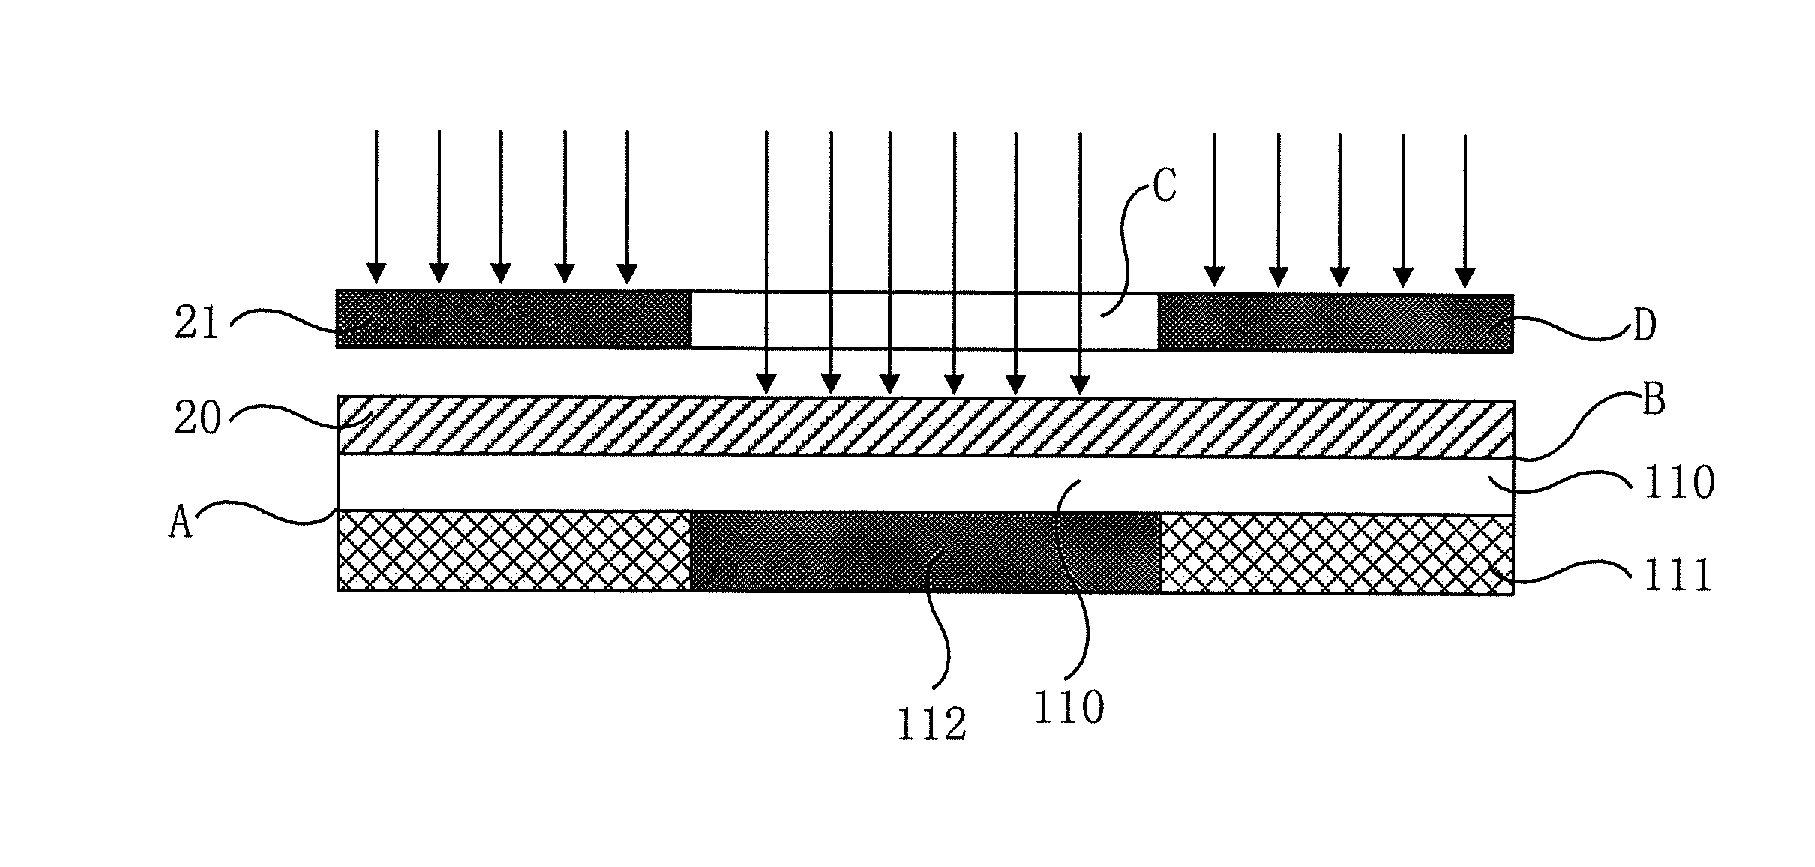 Display panel, display device and manufacturing method thereof